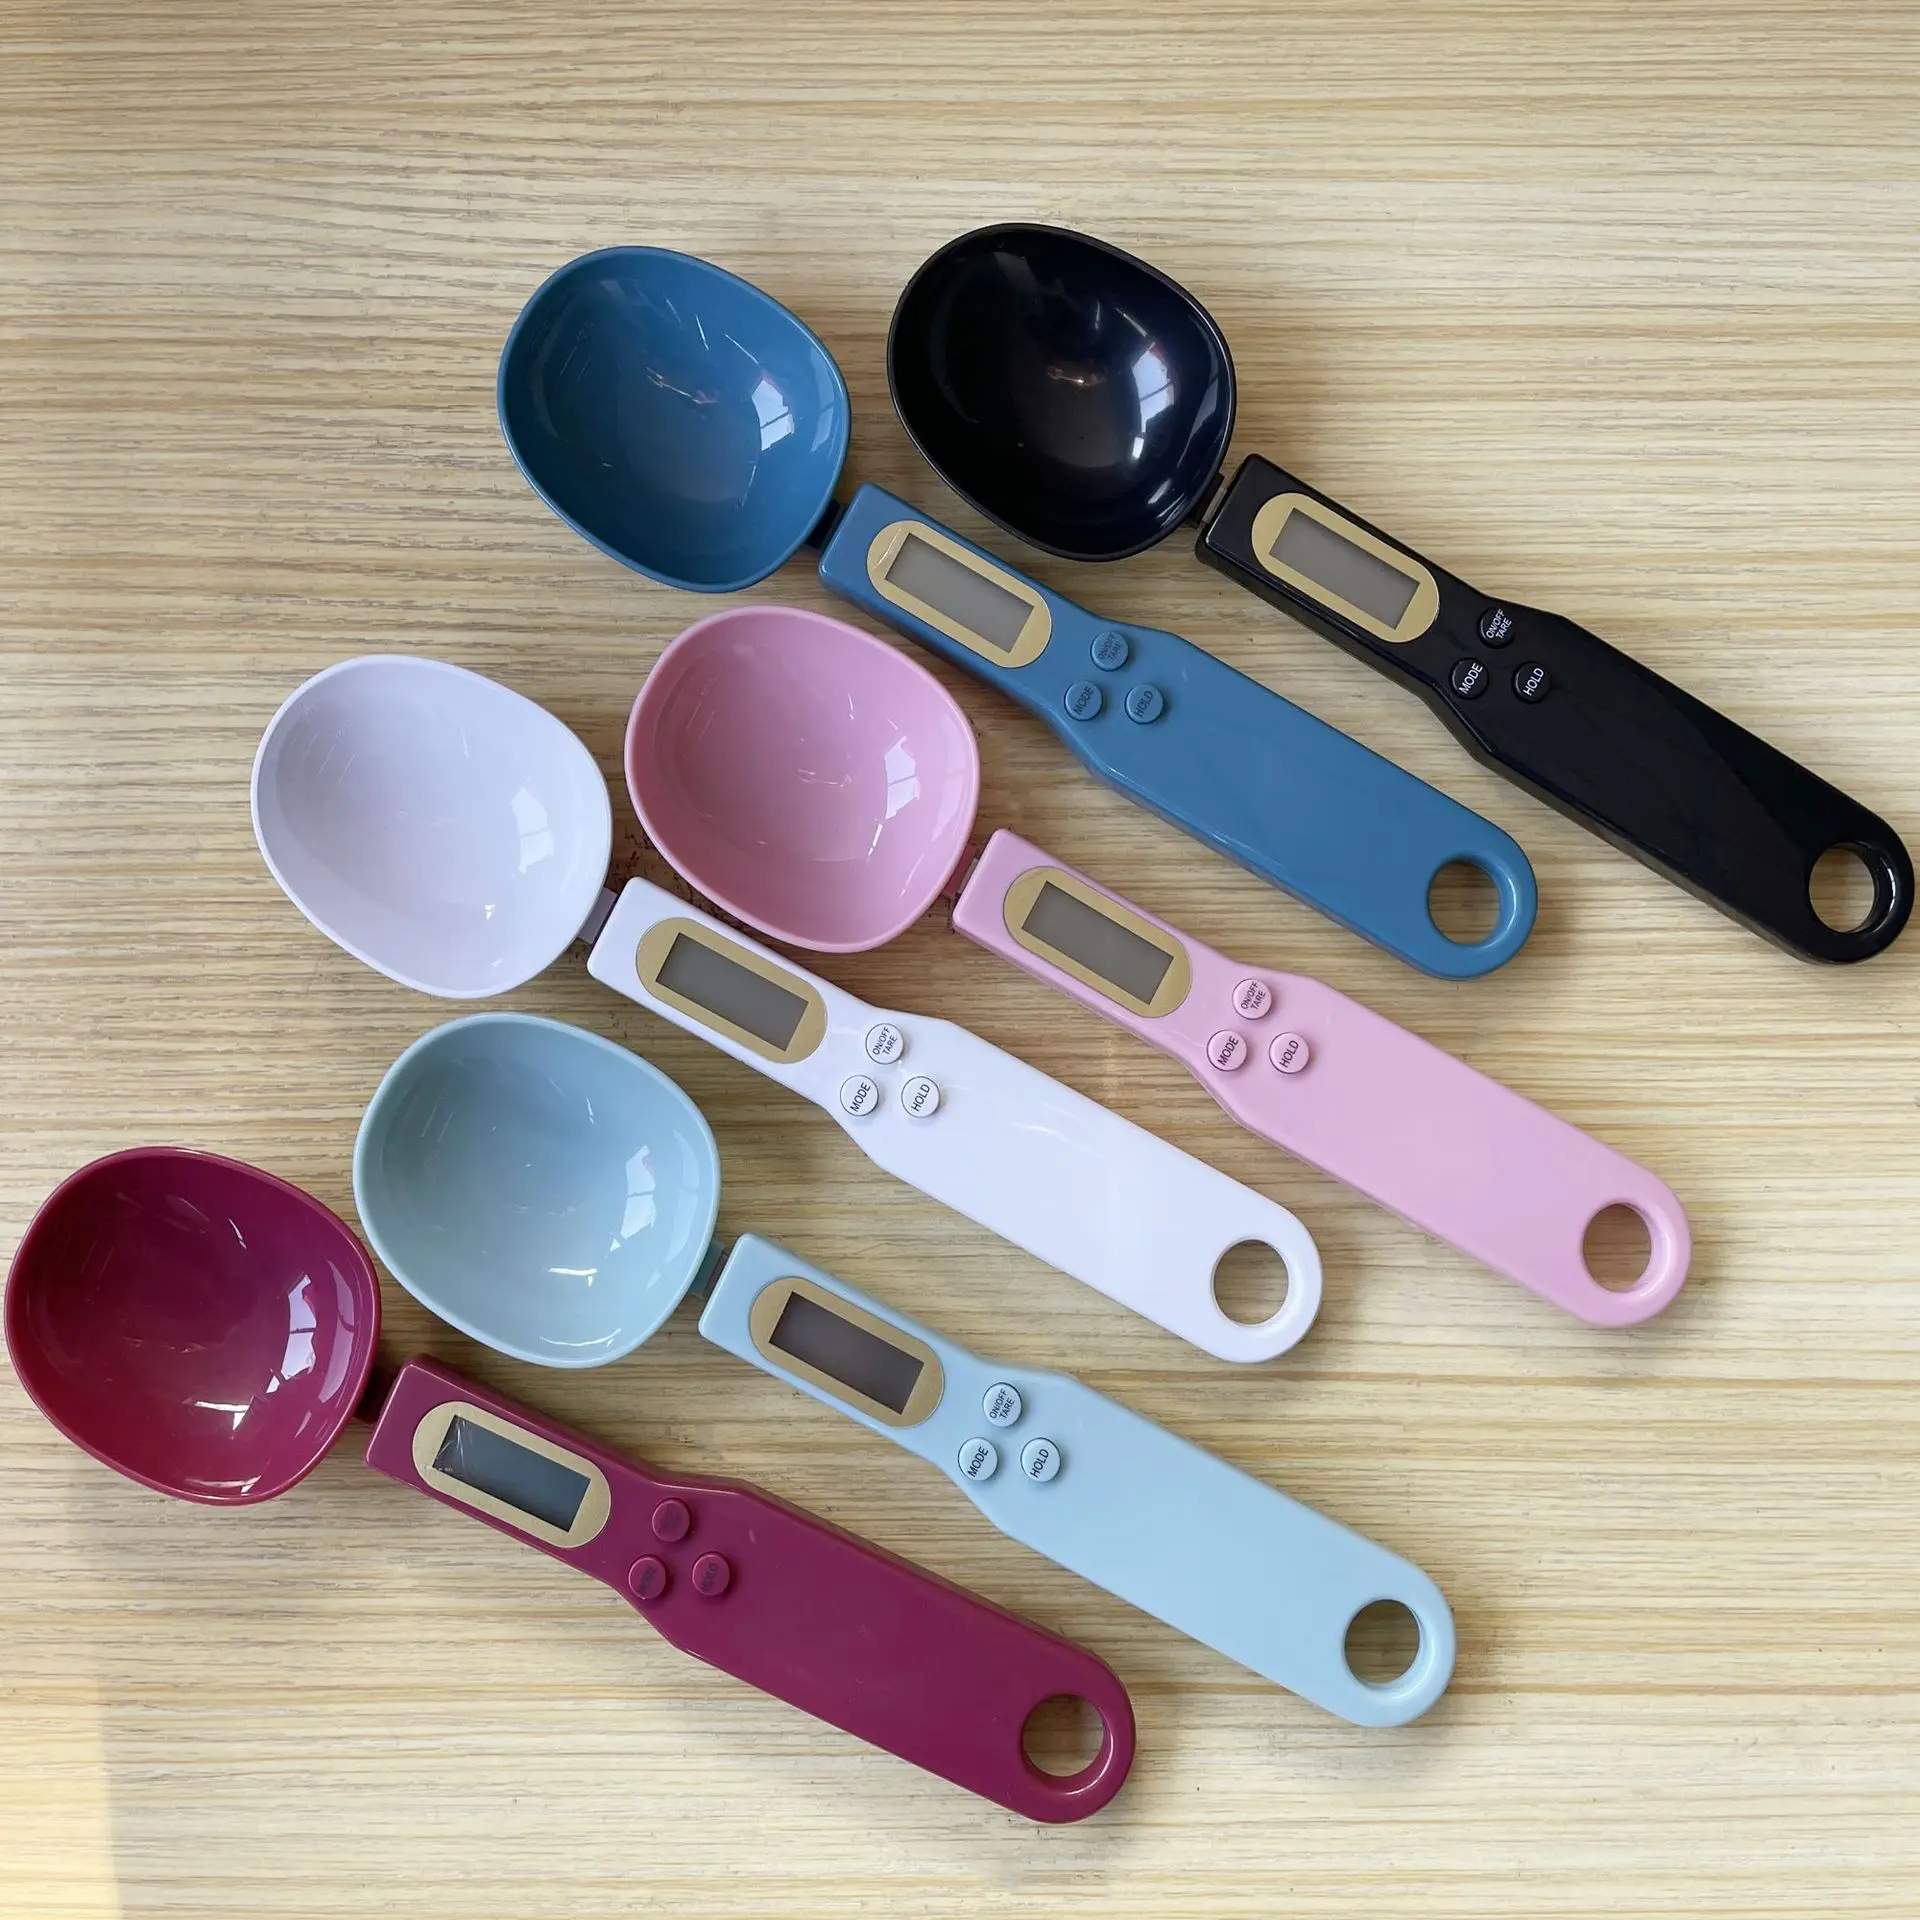 

Measuring Cup Electronic Kitchen Scales Baking Accessories Portable Digital LCD Measuring Spoons Coffee Sugar Gram Scale Spoon